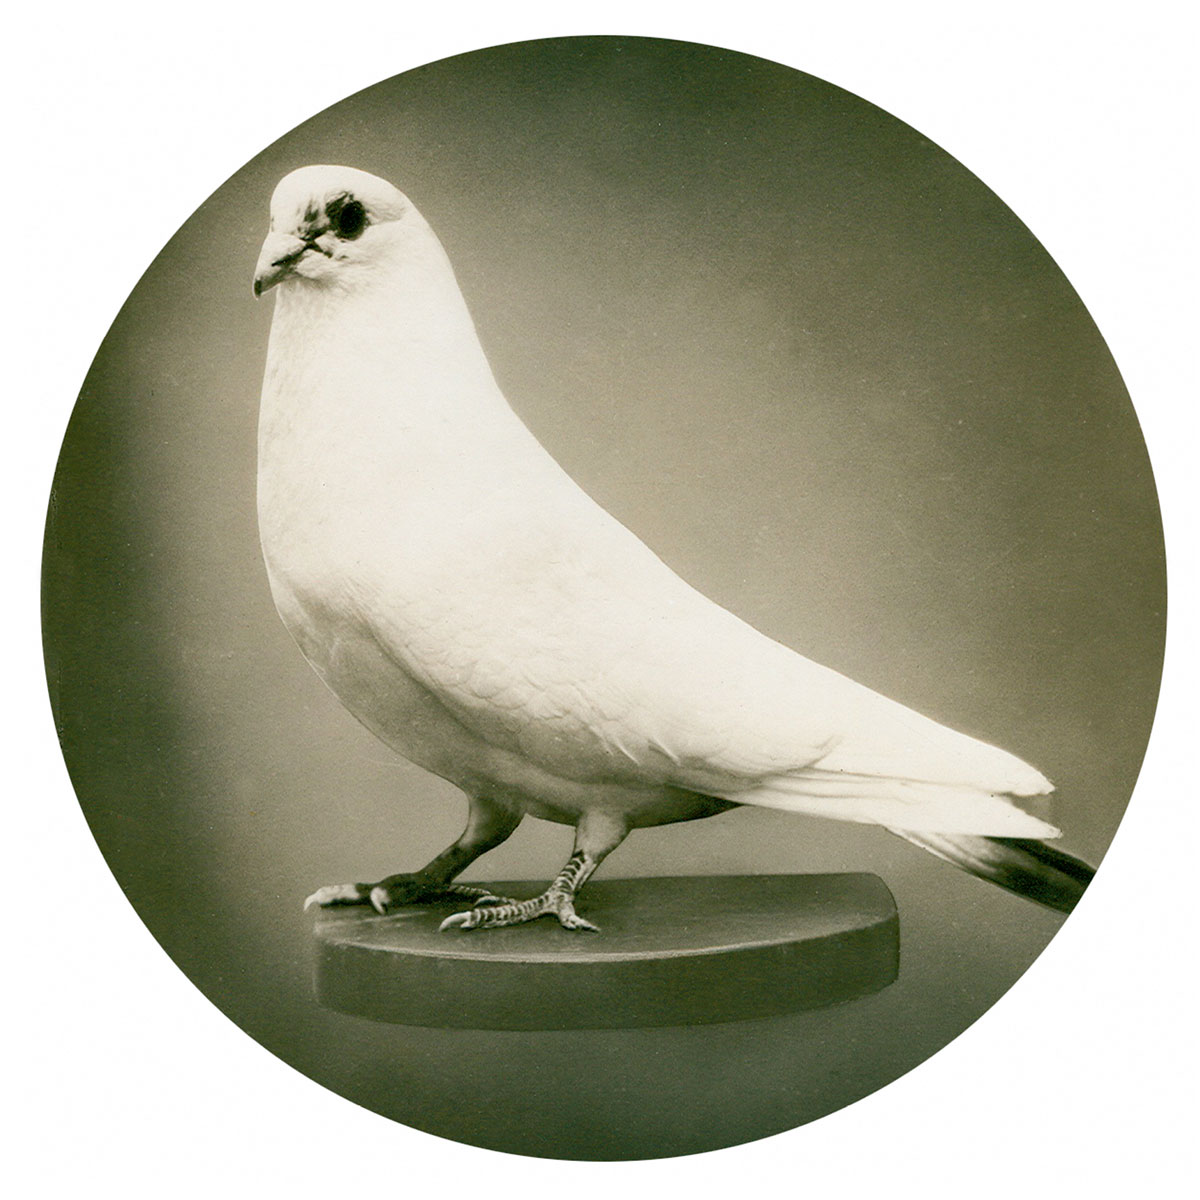 A photograph of a white pigeon, one of a number of photos purchased by Nikola Tesla in nineteen thirty-eight to be used as part of a presentation outlining a mixture he had developed for a natural diet for birds. 